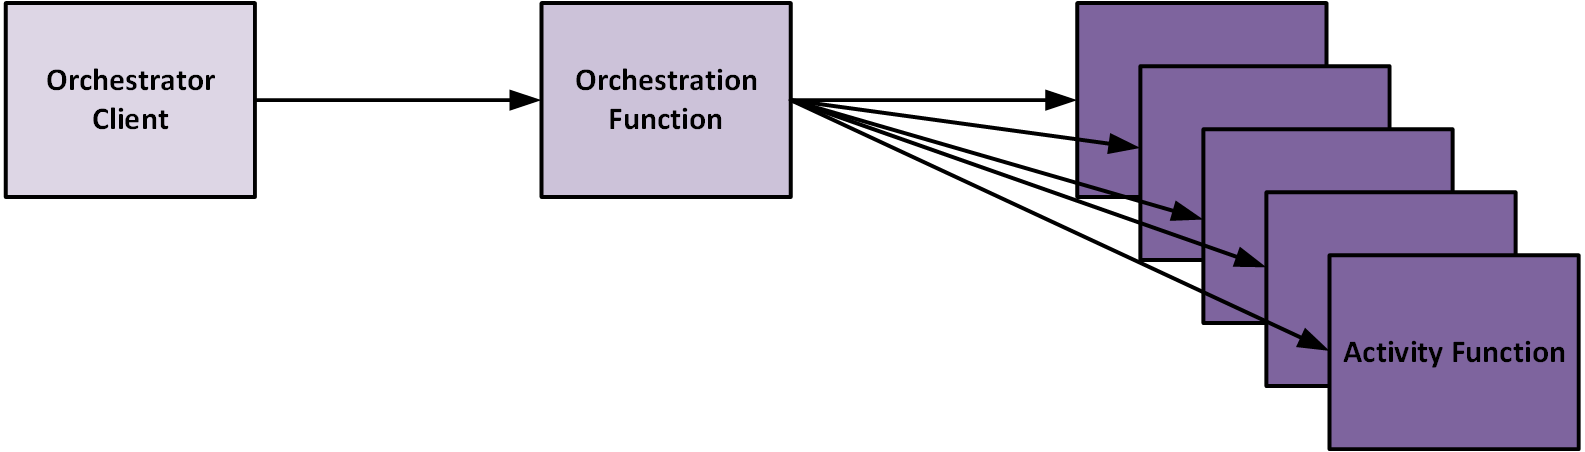 Orchestrator client